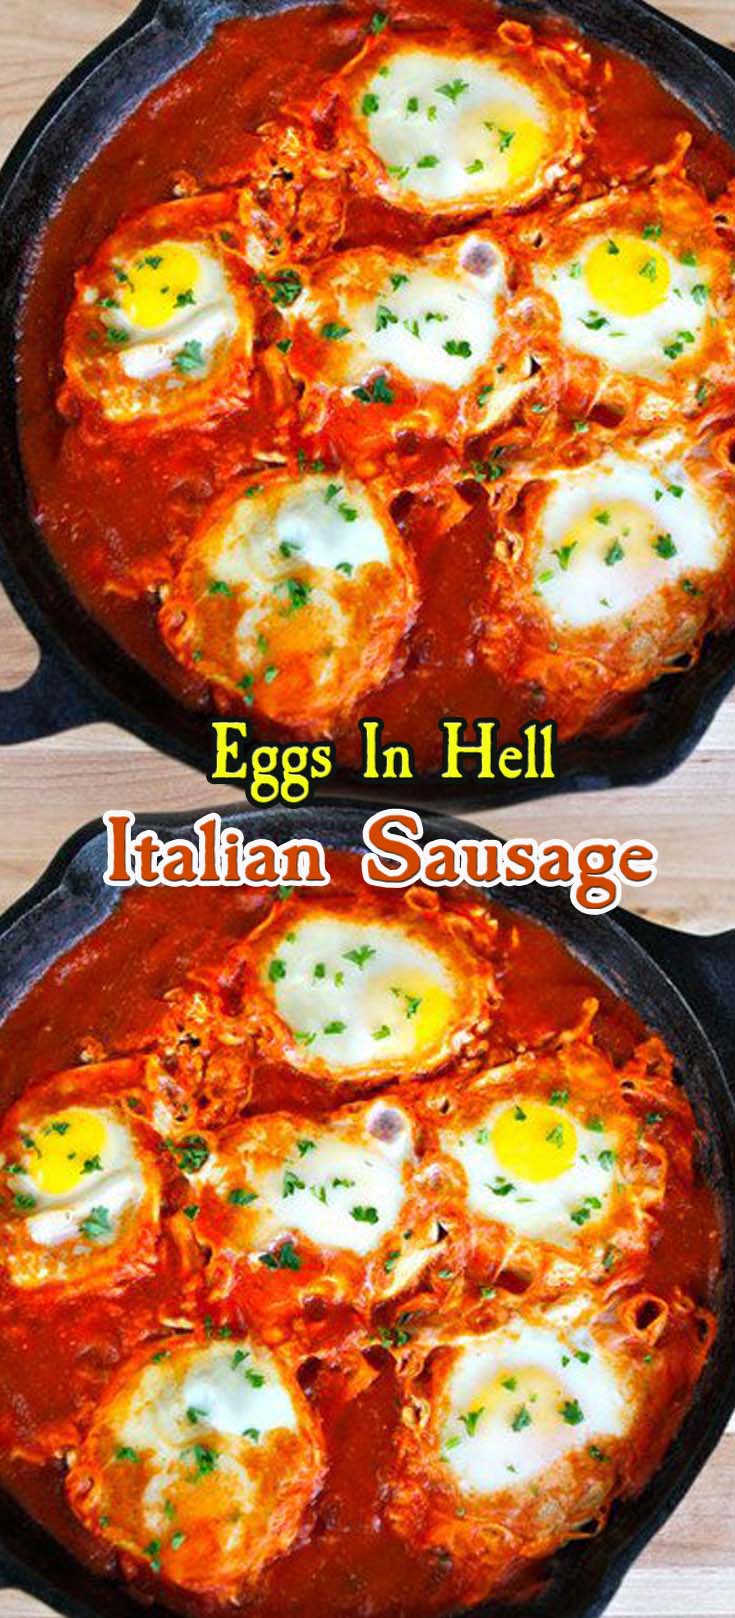 Eggs In Hell Italian Sausage